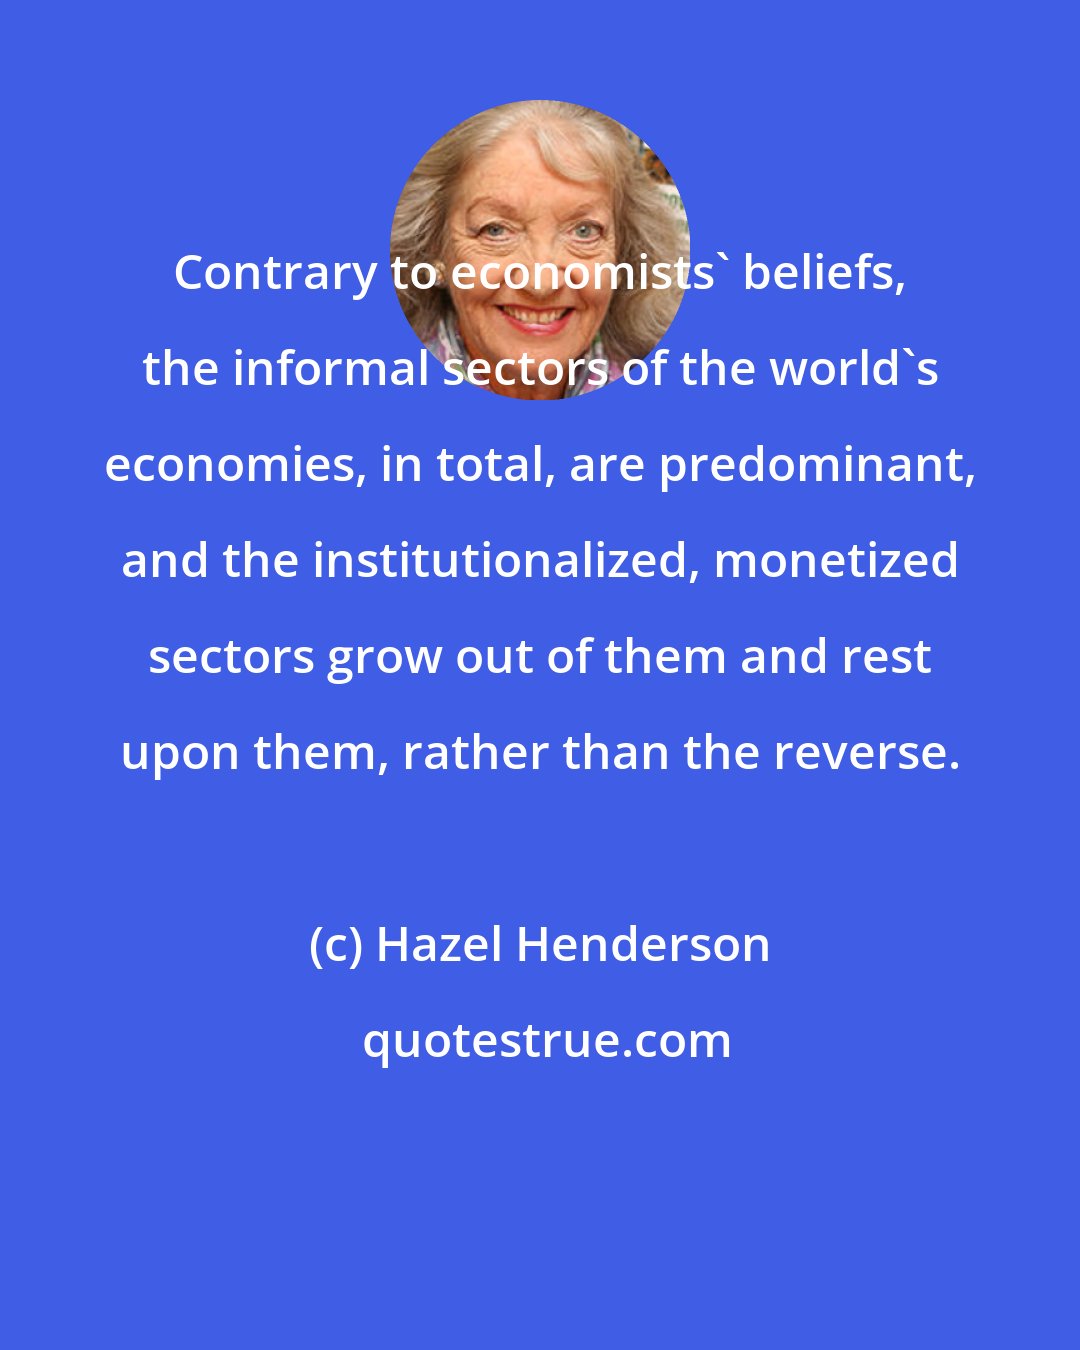 Hazel Henderson: Contrary to economists' beliefs, the informal sectors of the world's economies, in total, are predominant, and the institutionalized, monetized sectors grow out of them and rest upon them, rather than the reverse.